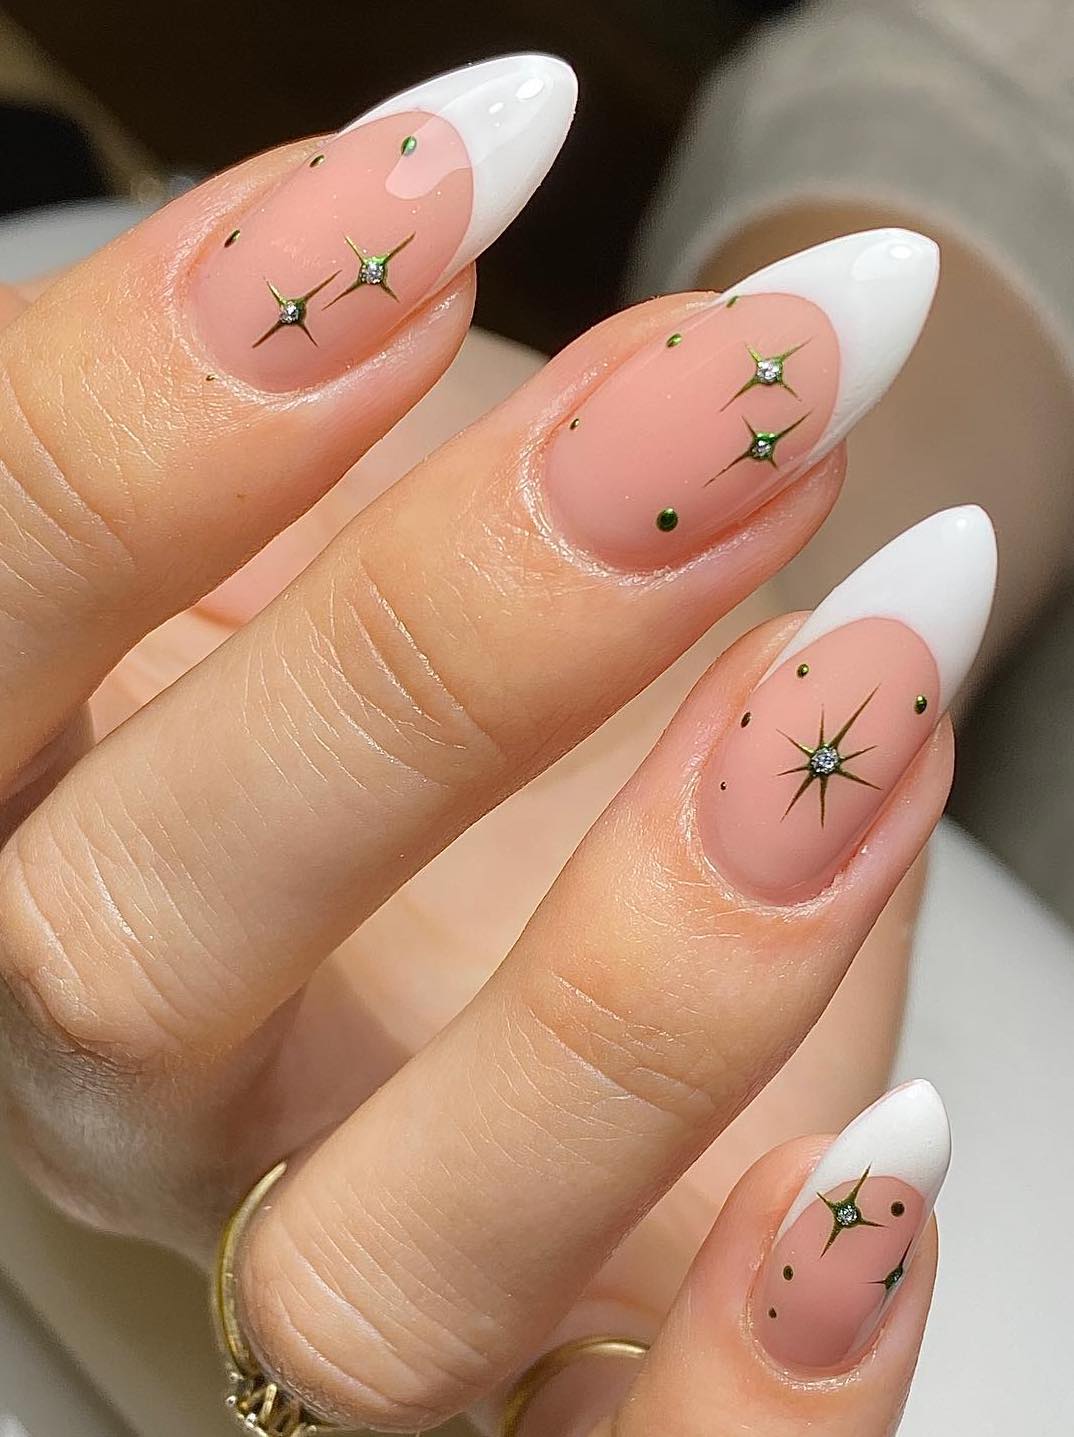 White French tip nails with star details.